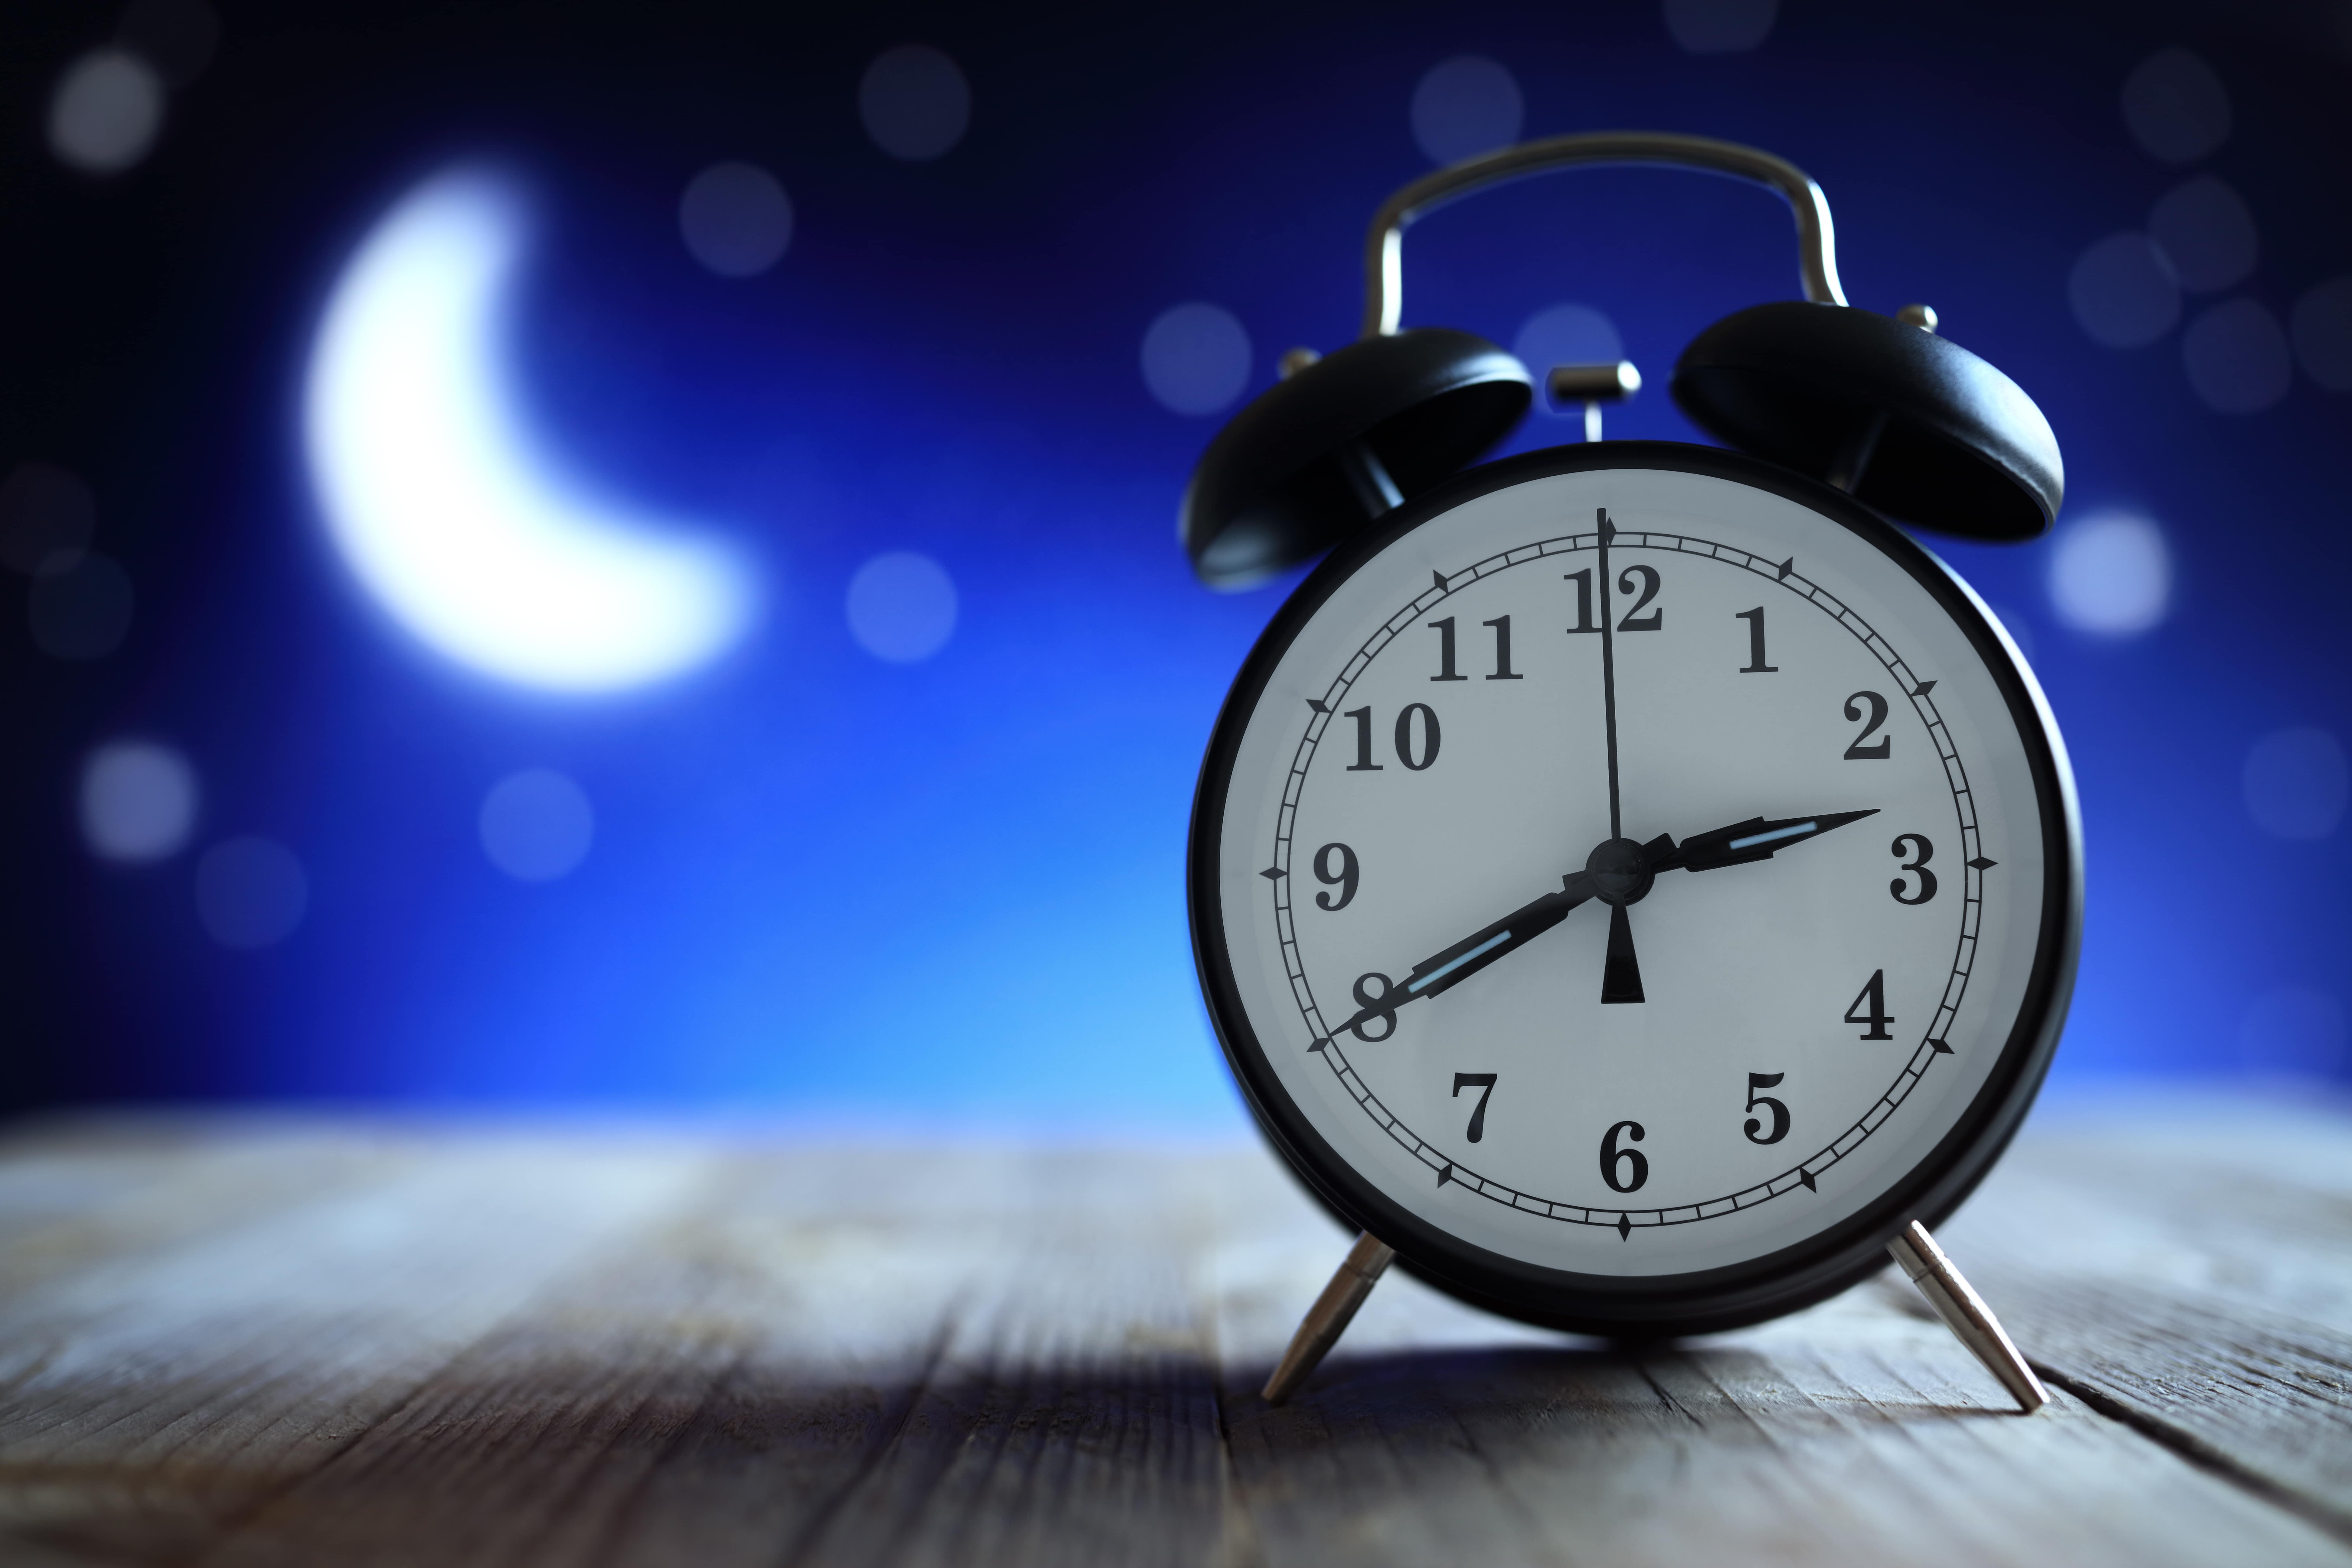 A traditional alarm clock is in the foreground on a wooden floor. The background is blue with a blurred image of a white crescent moon.